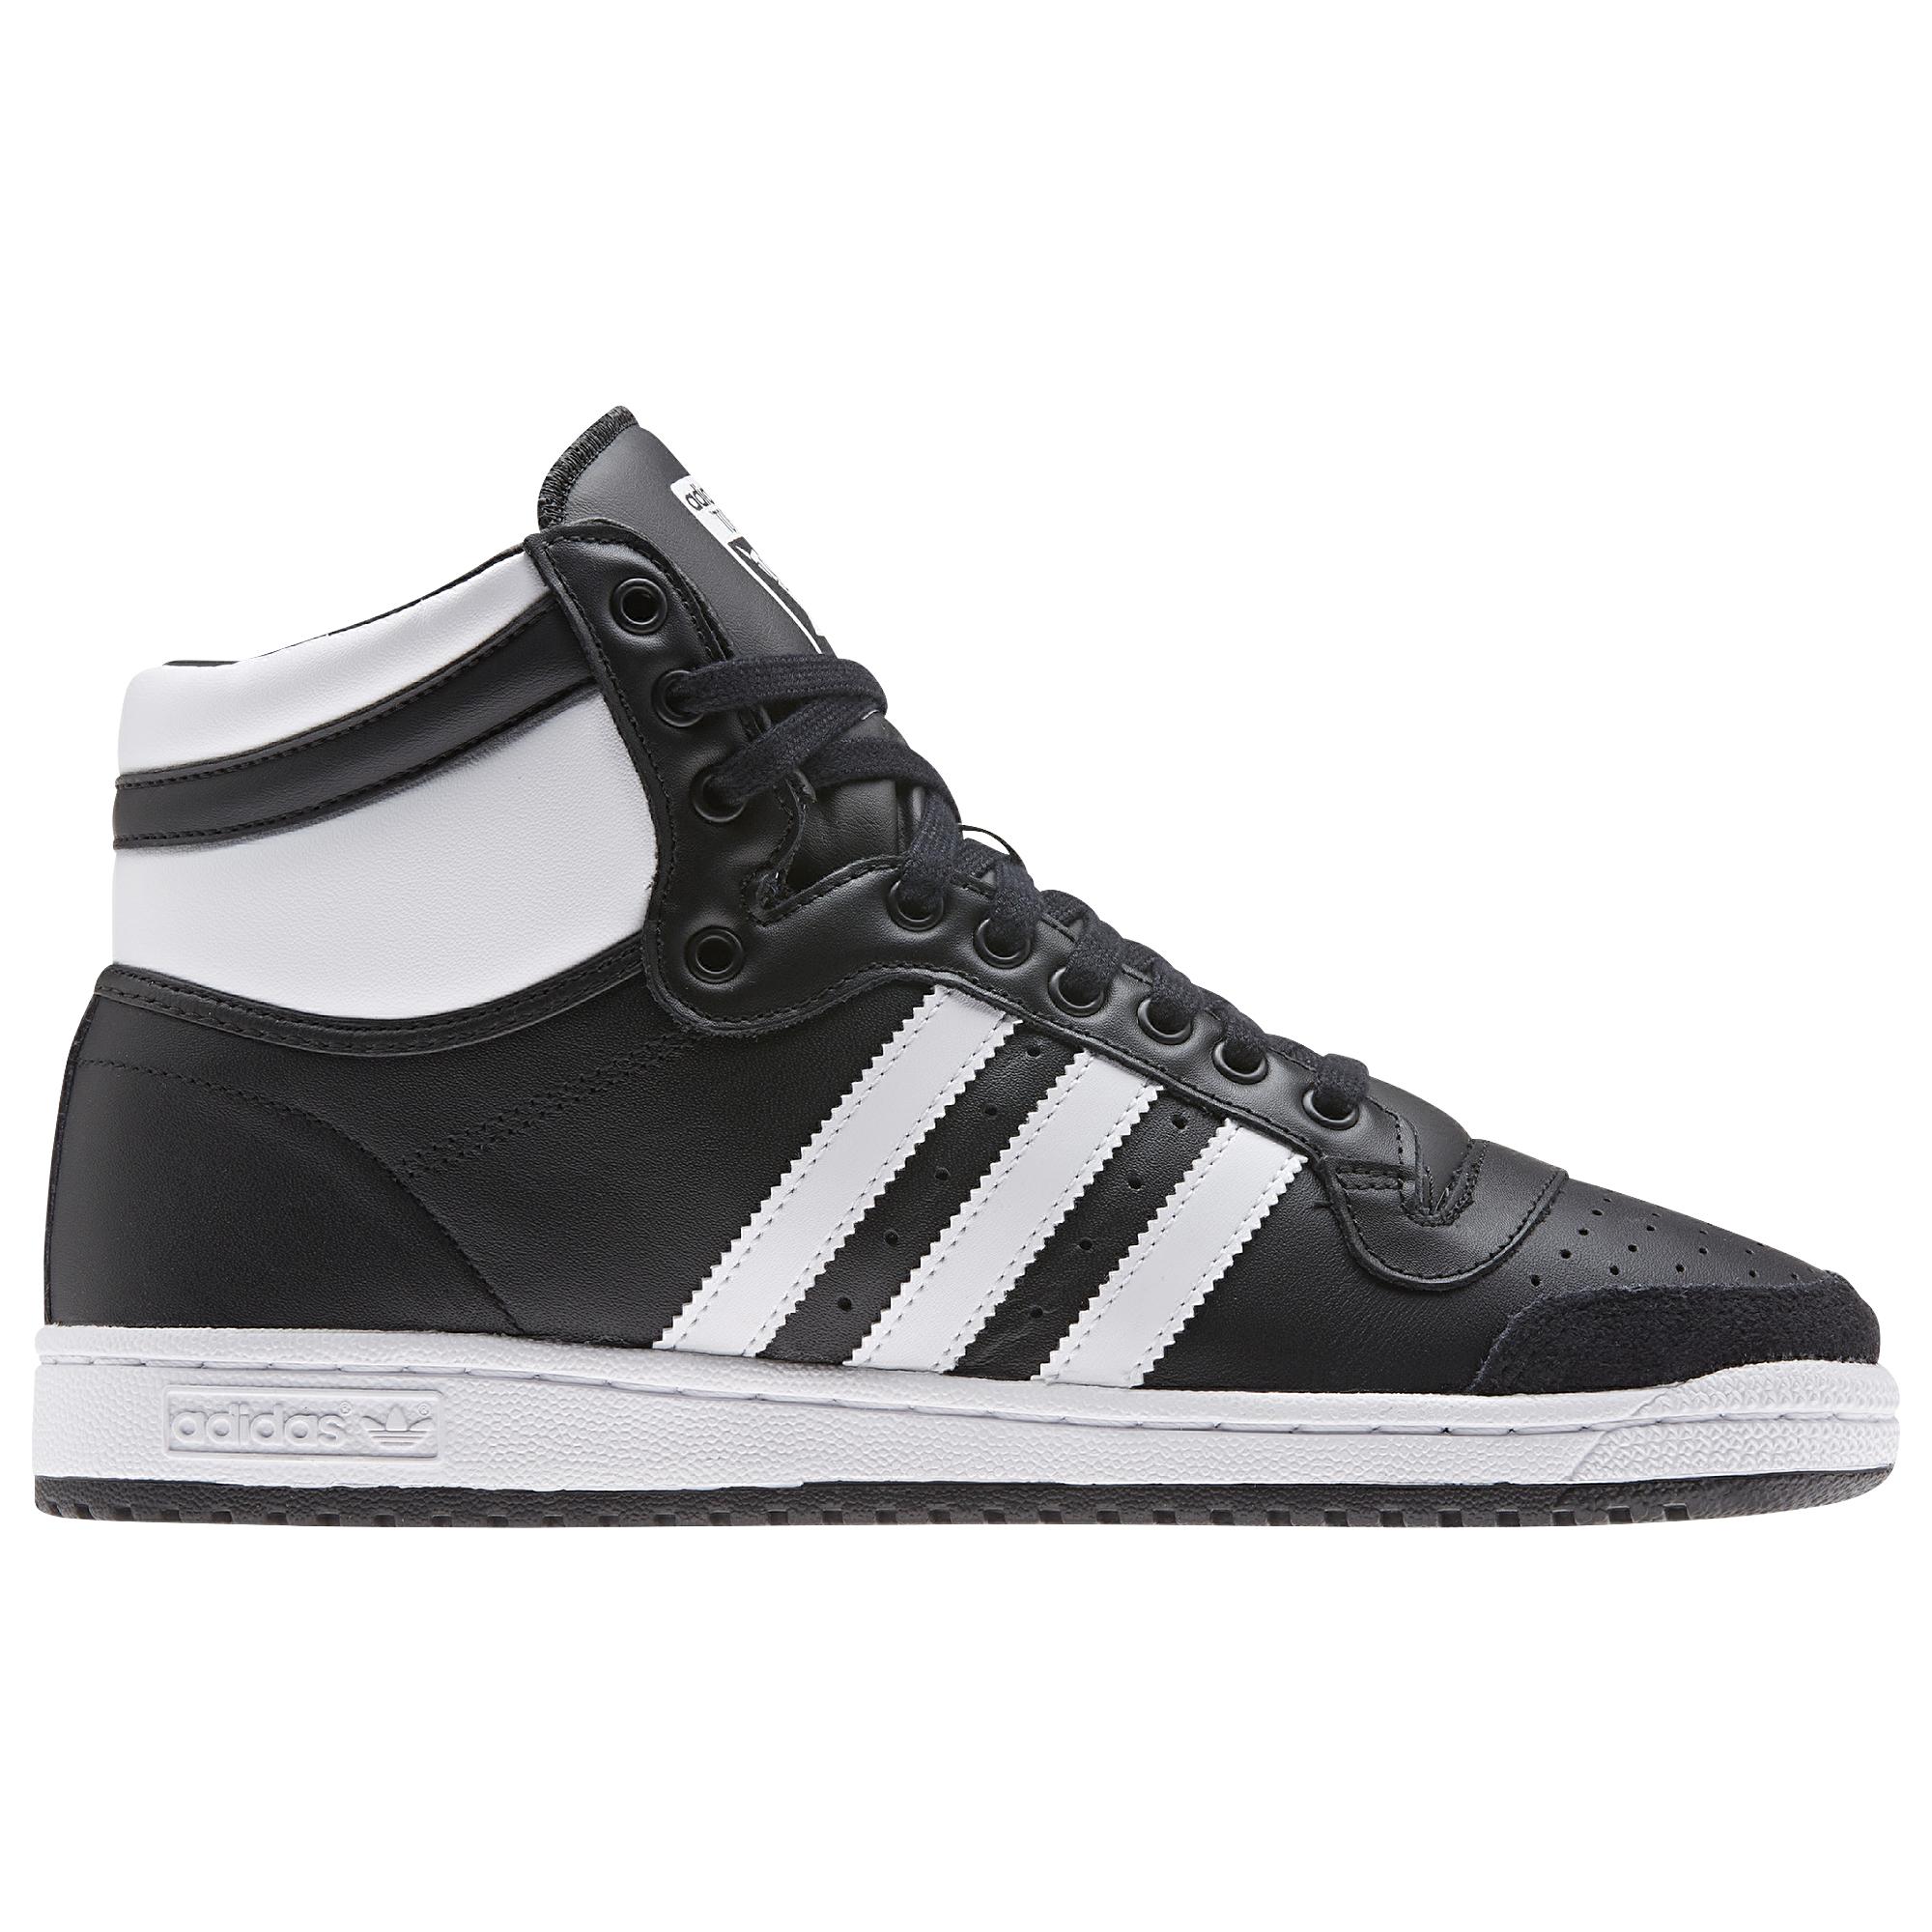 adidas Originals Leather Top Ten Hi Basketball Shoes in Black/White ...